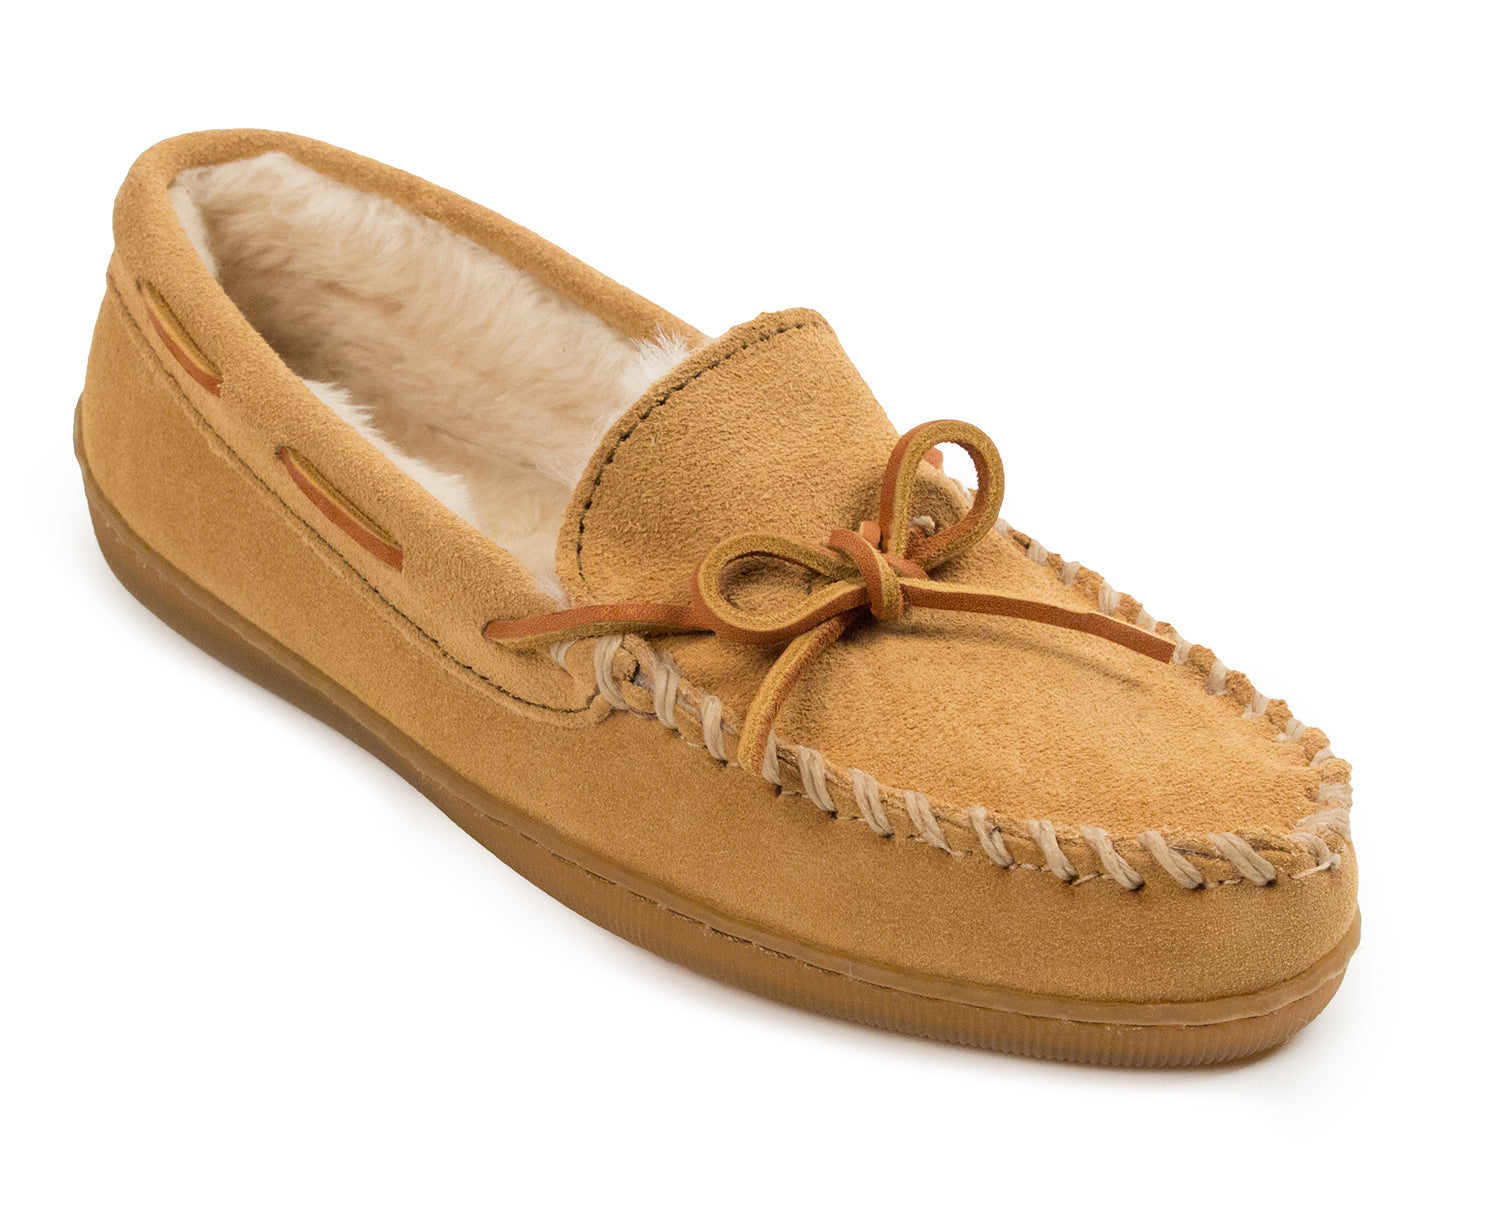 Pile Lined Hardsole Slipper in Tan from 3/4 Angle View